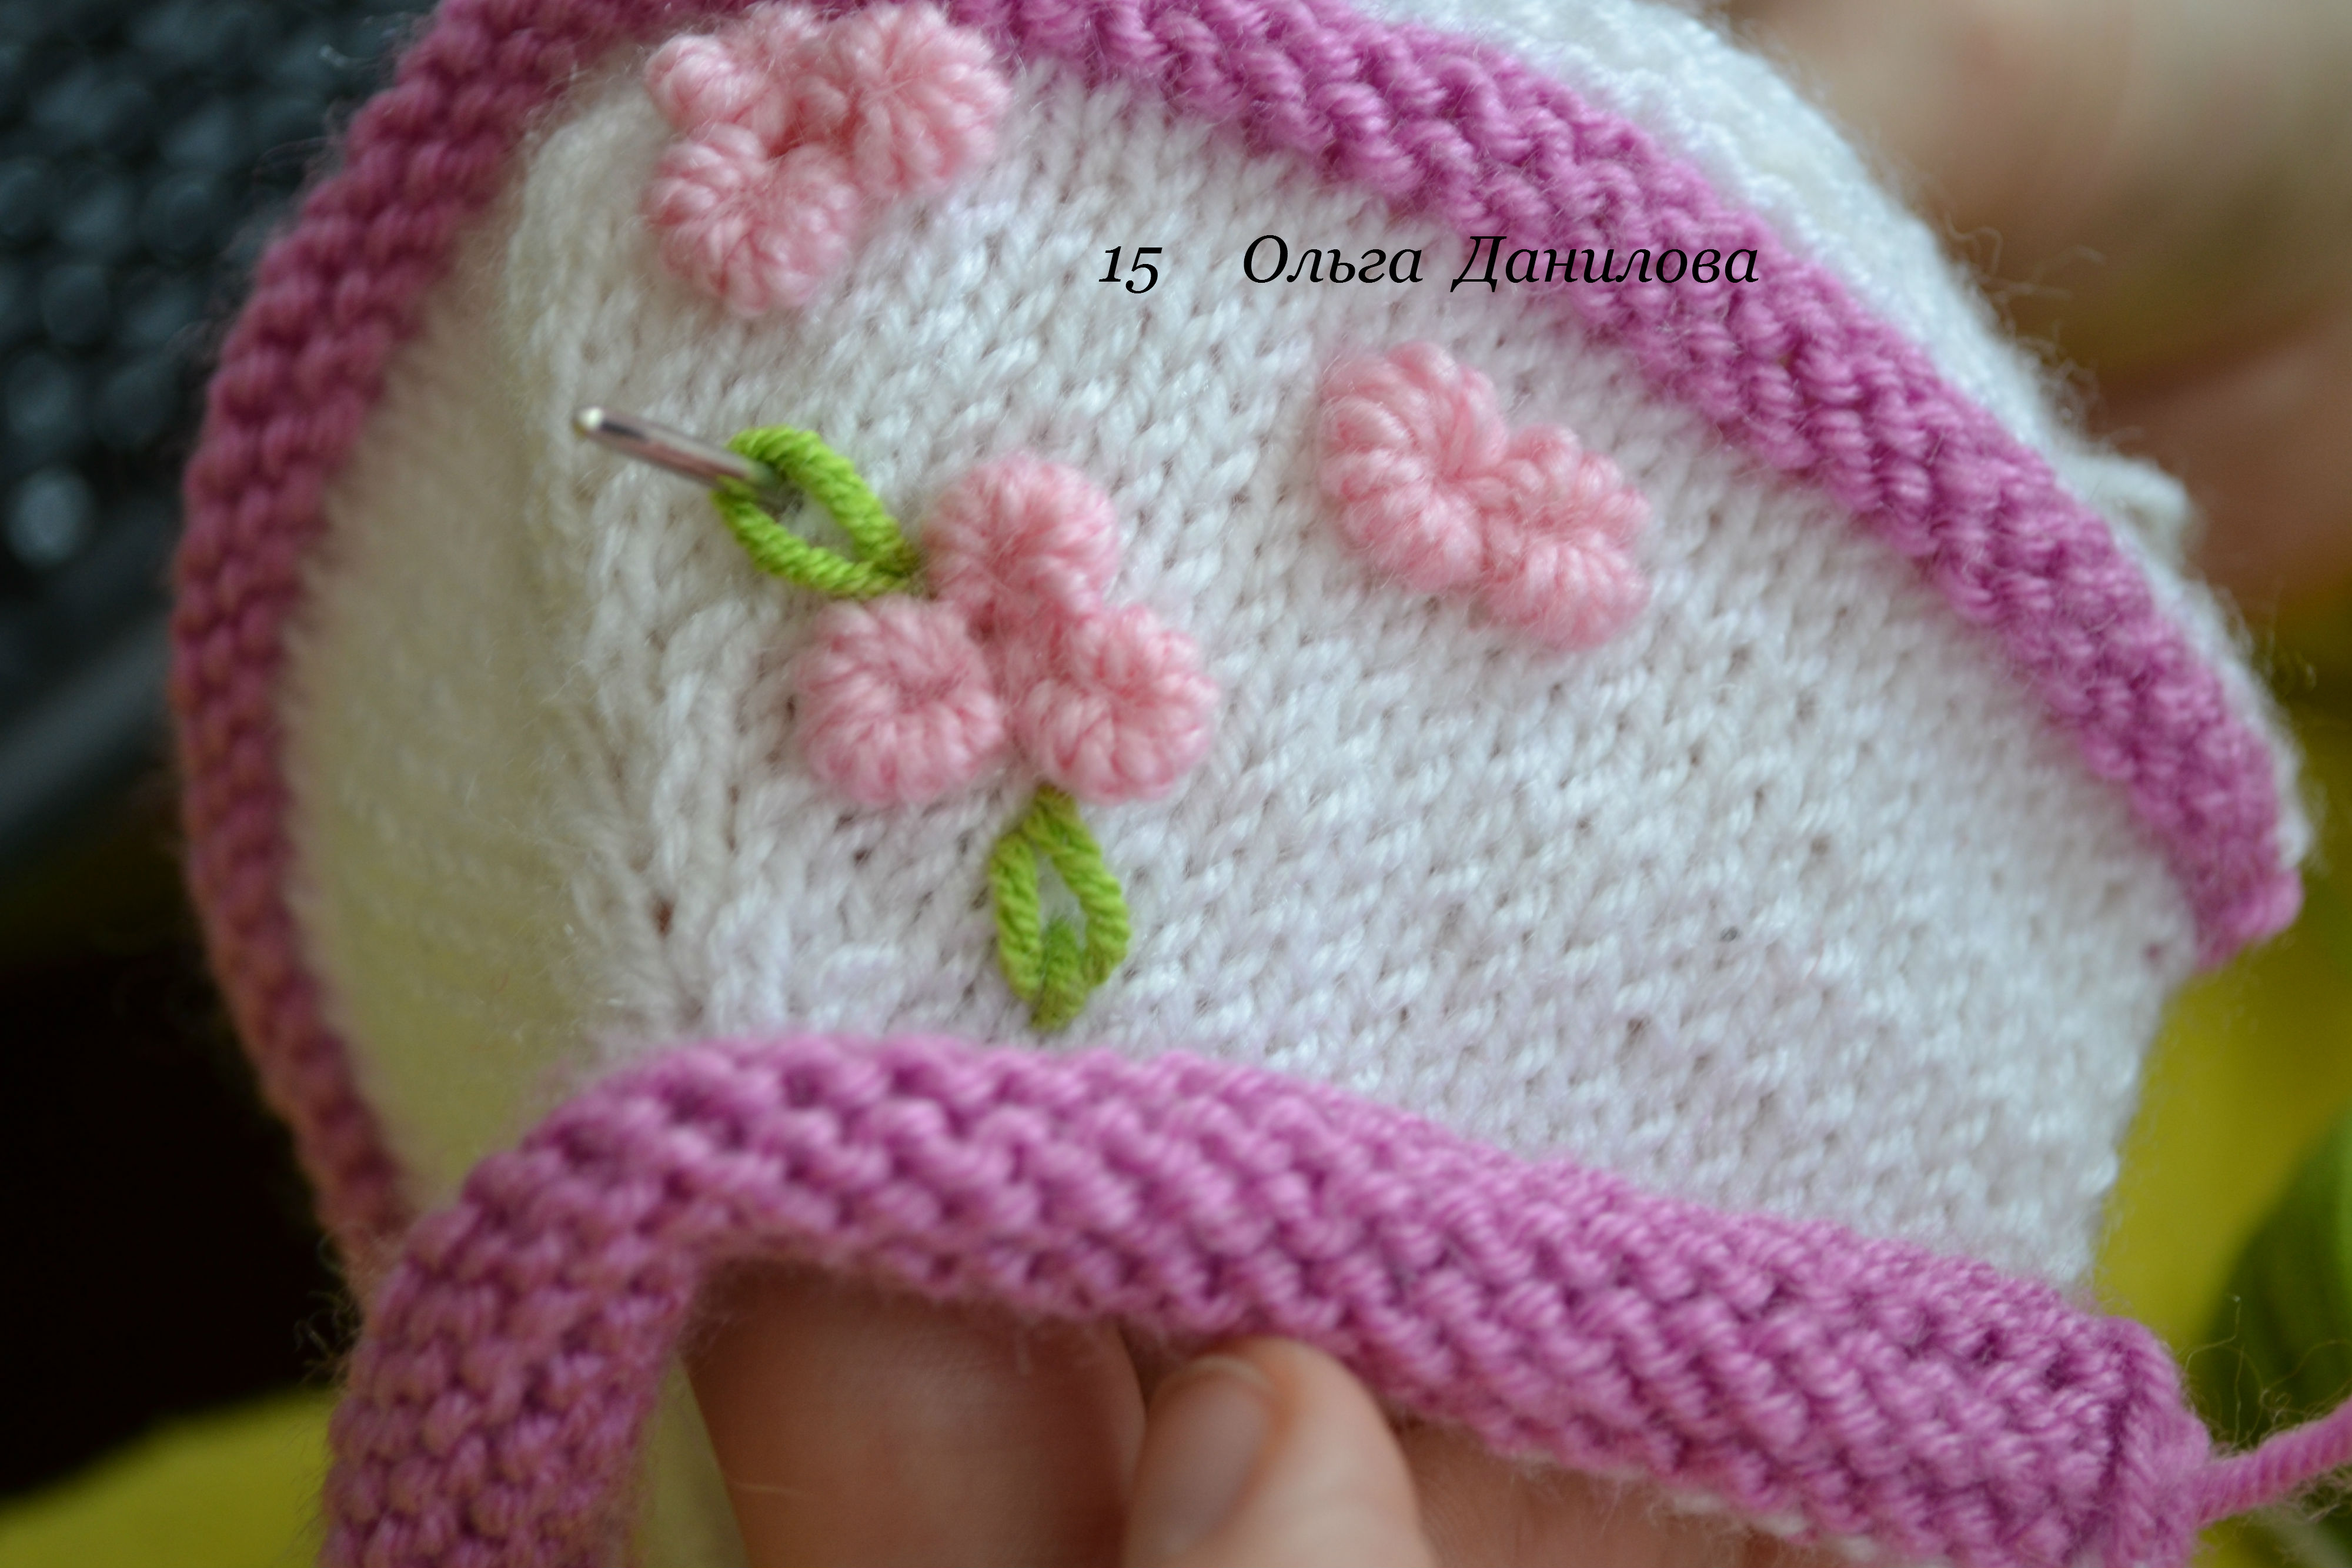 How-to-Make-Pretty-Knitted-Baby-Booties-17.jpg